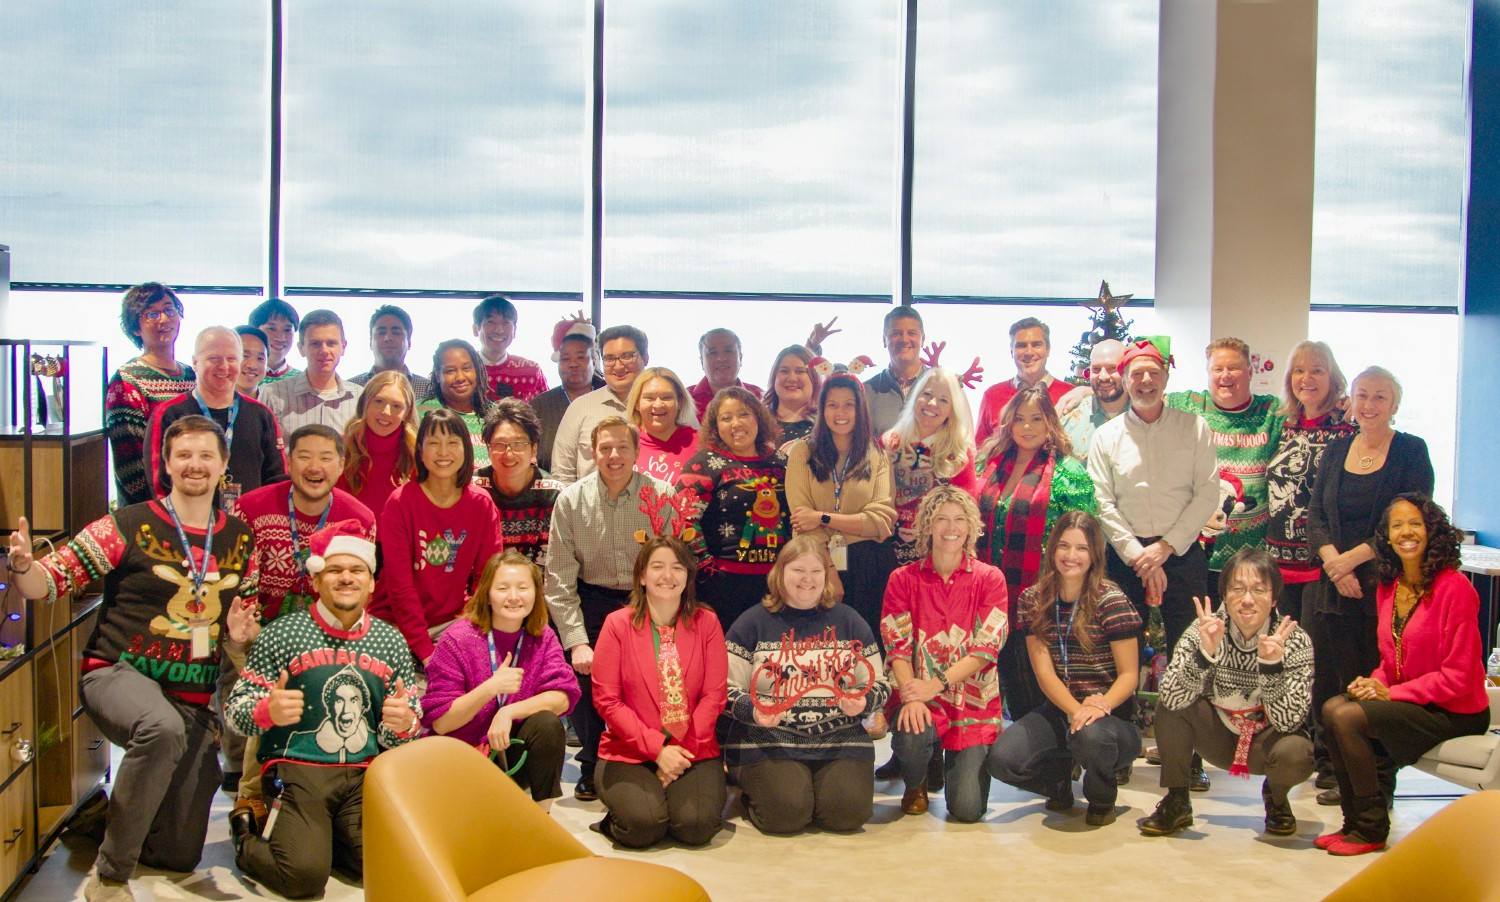 Happy Holidays from our corporate office employees!